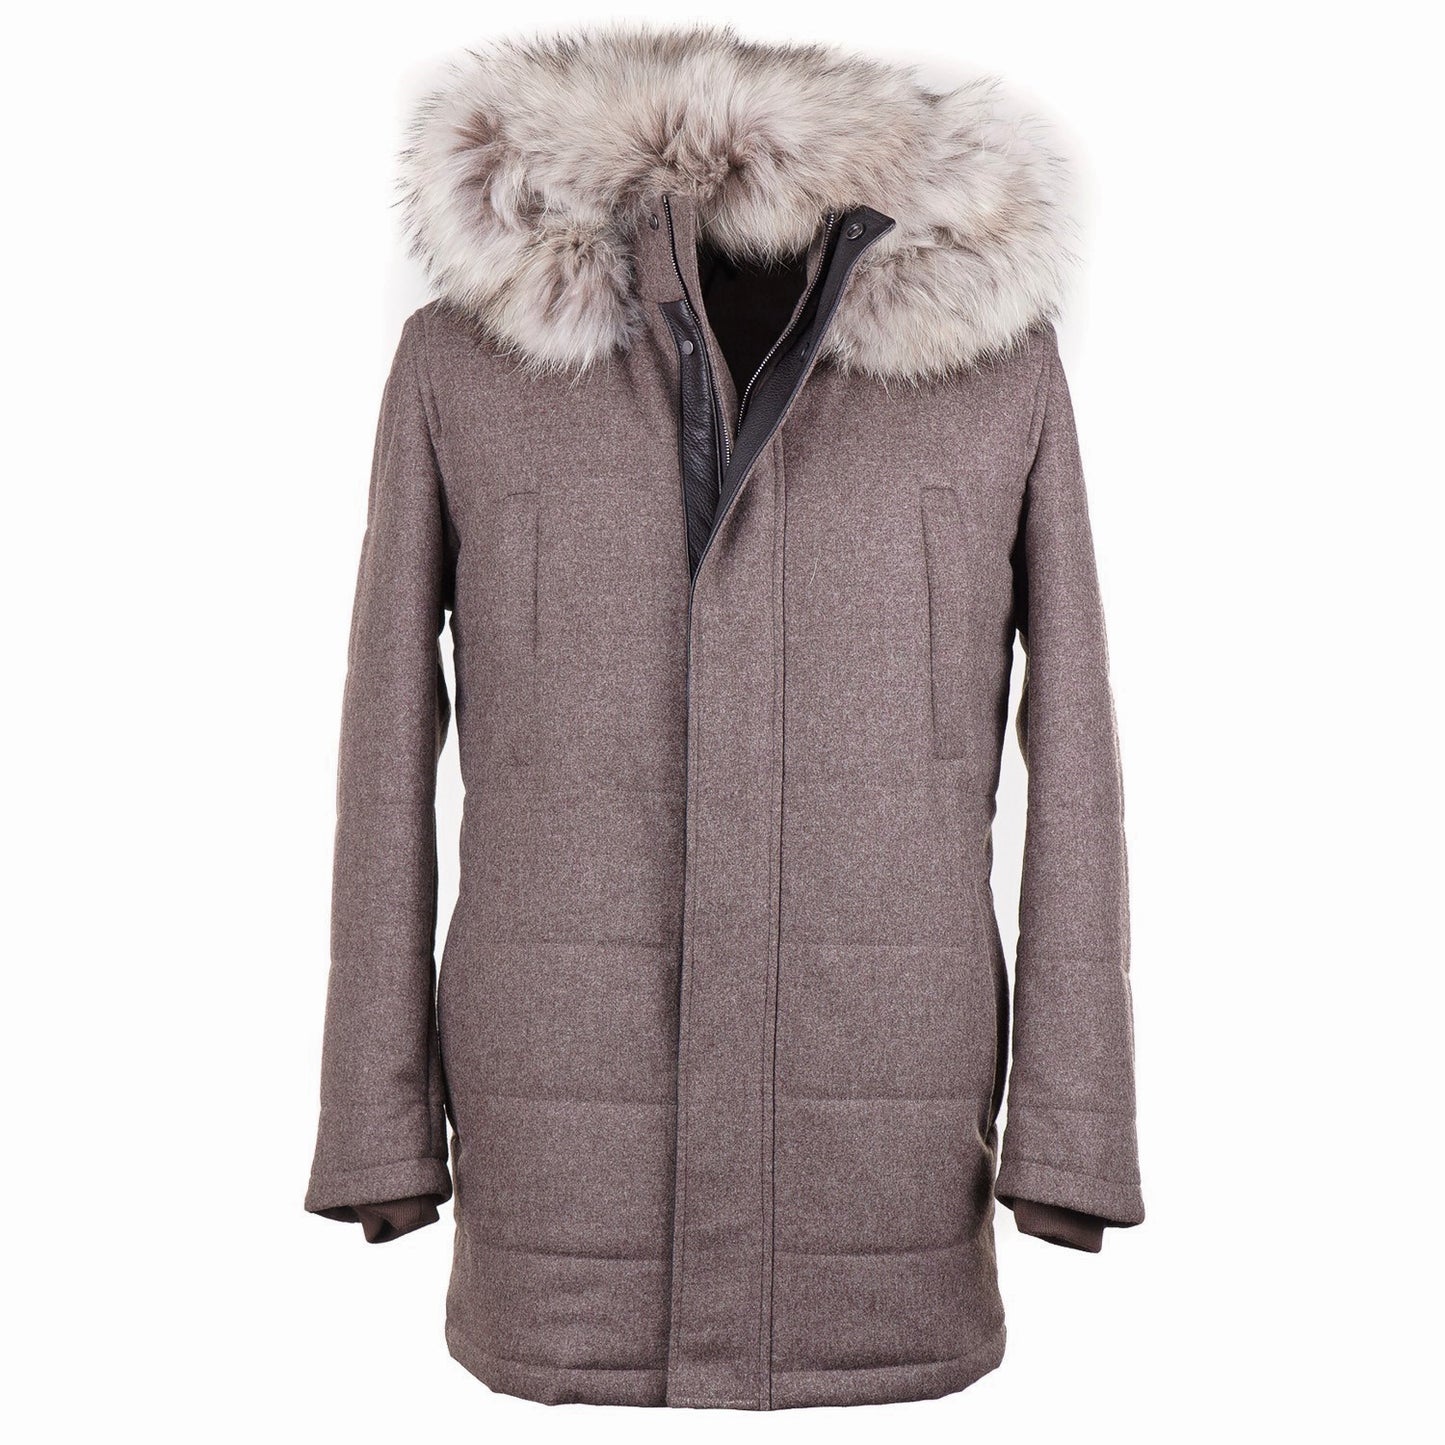 Rifugio Quilted Flannel Wool Parka with Fur Hood - Top Shelf Apparel